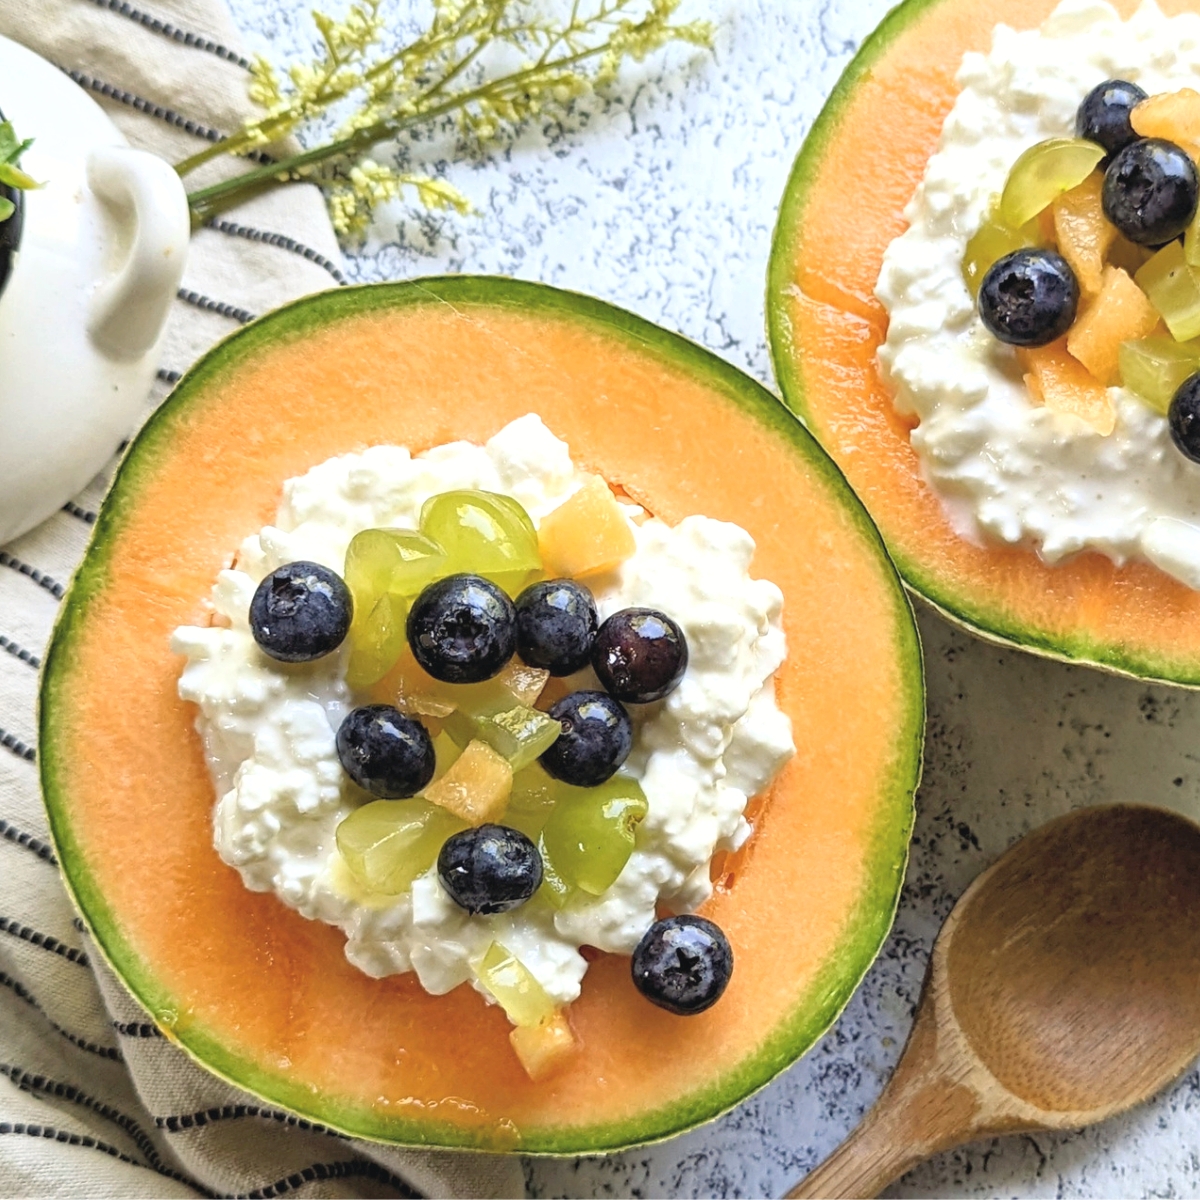 cottage cheese fruit recipes cantaloupe and cottage cheese breakfast ideas with berries and grapes in an edible bowl.